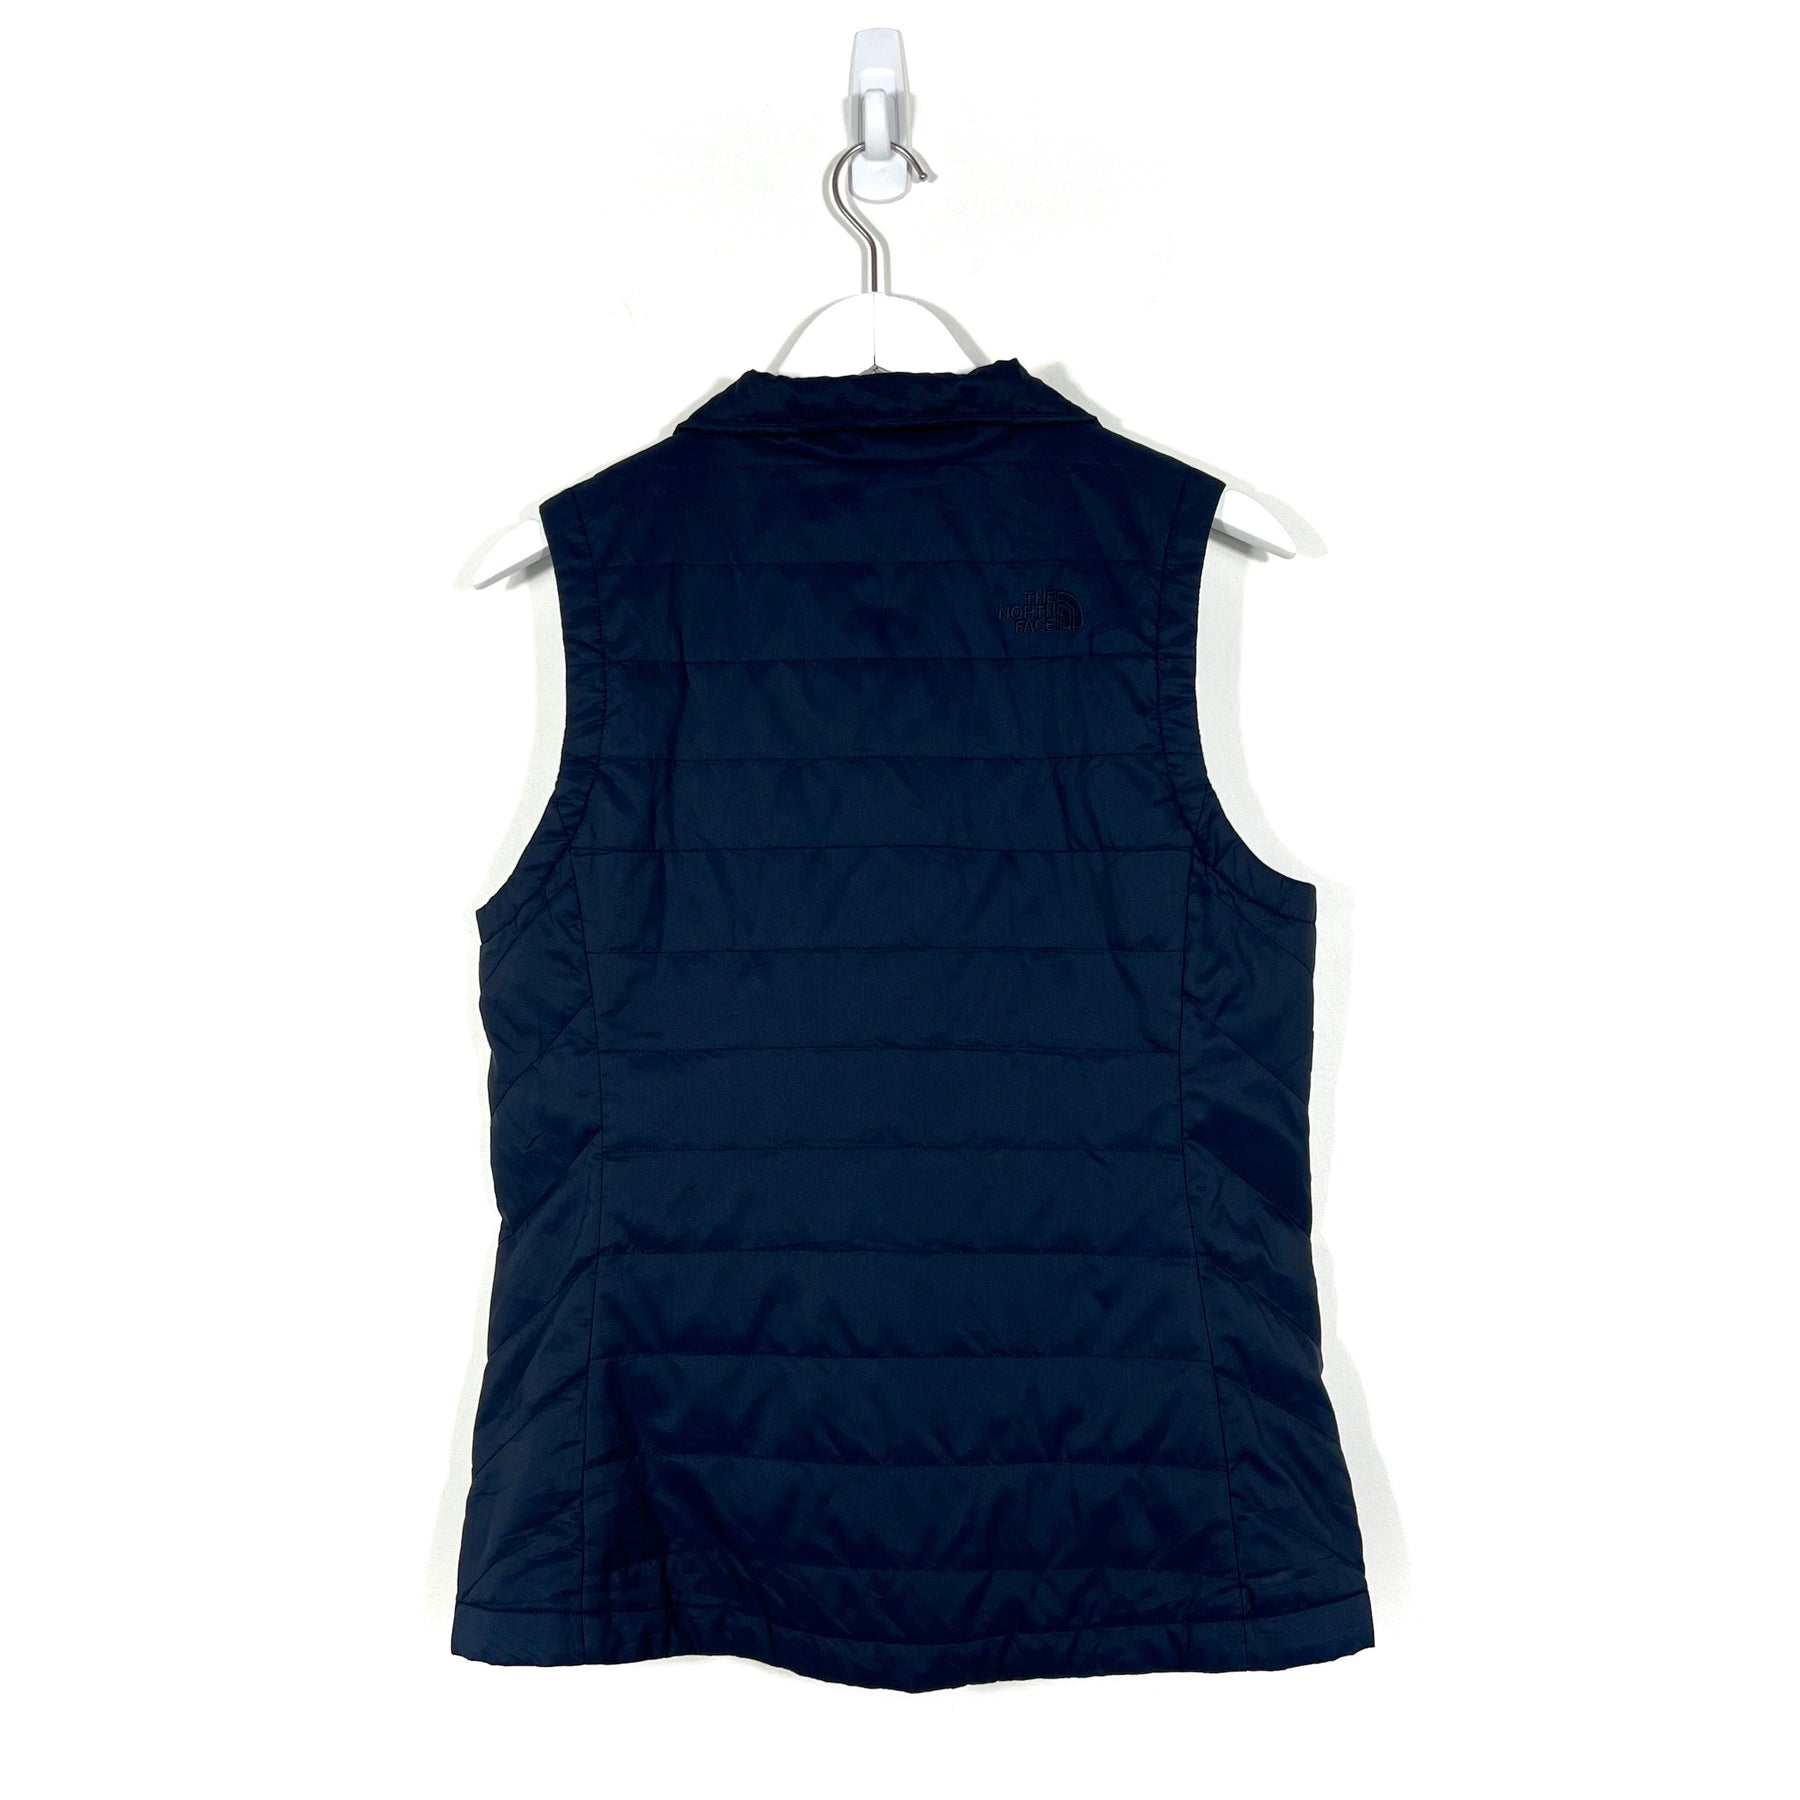 Vintage The North Face Lightweight Vest - Women's Small